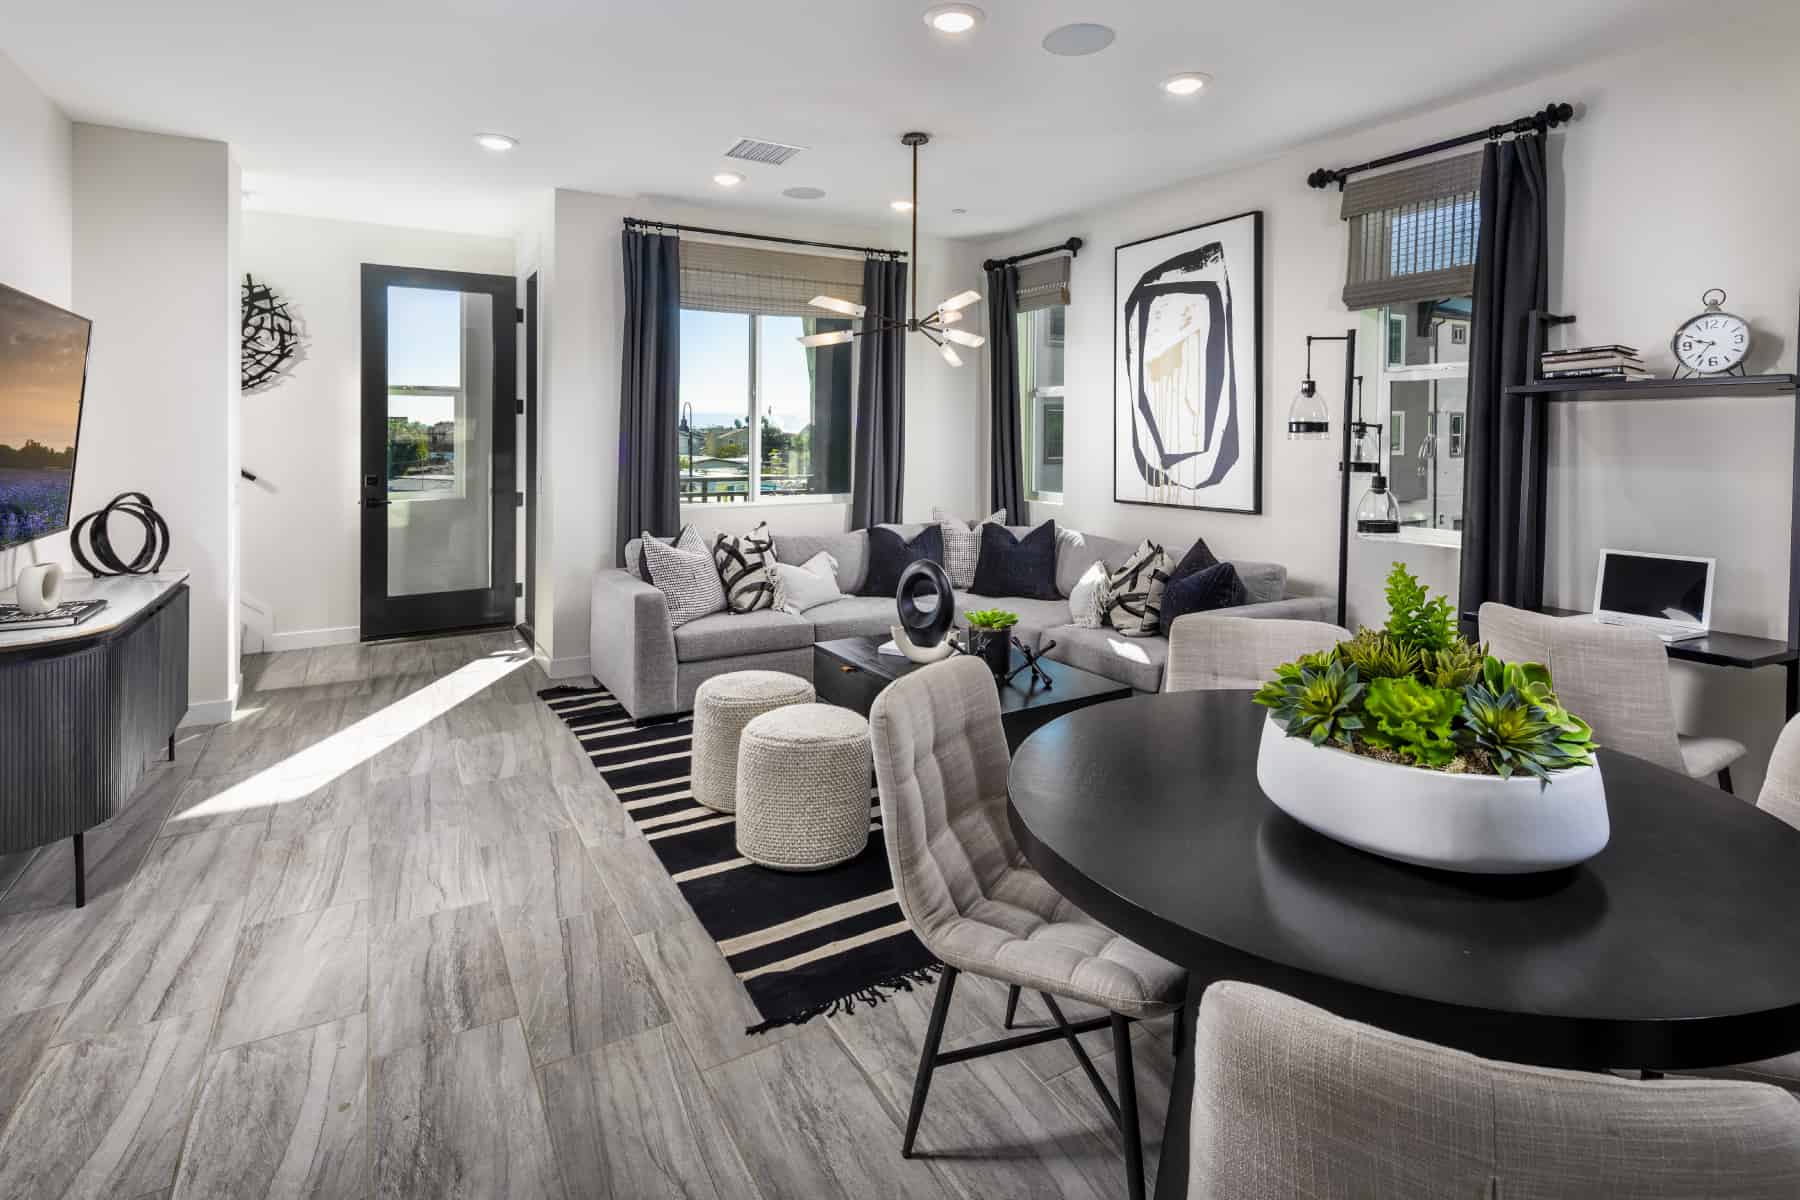 Dining/Living Room in Plan 3 at Moneta Pointe by Melia Homes in Gardena, CA